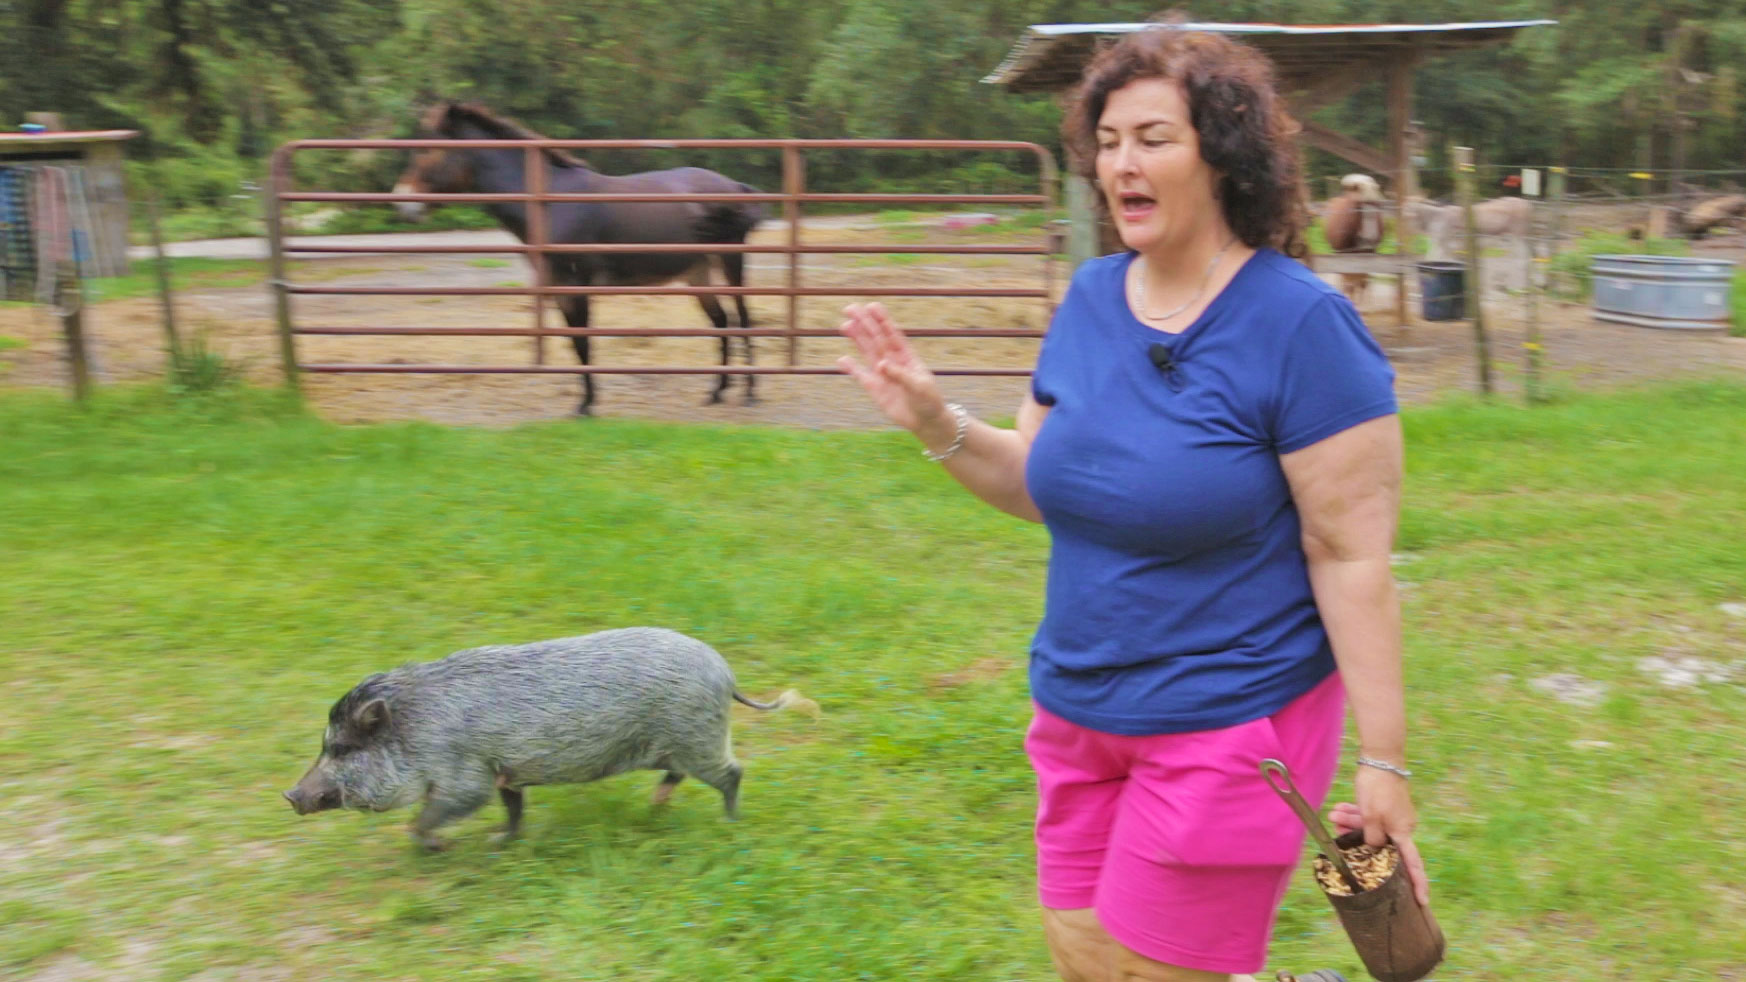 Homesteading Today: A Tour of Becky’s Homestead